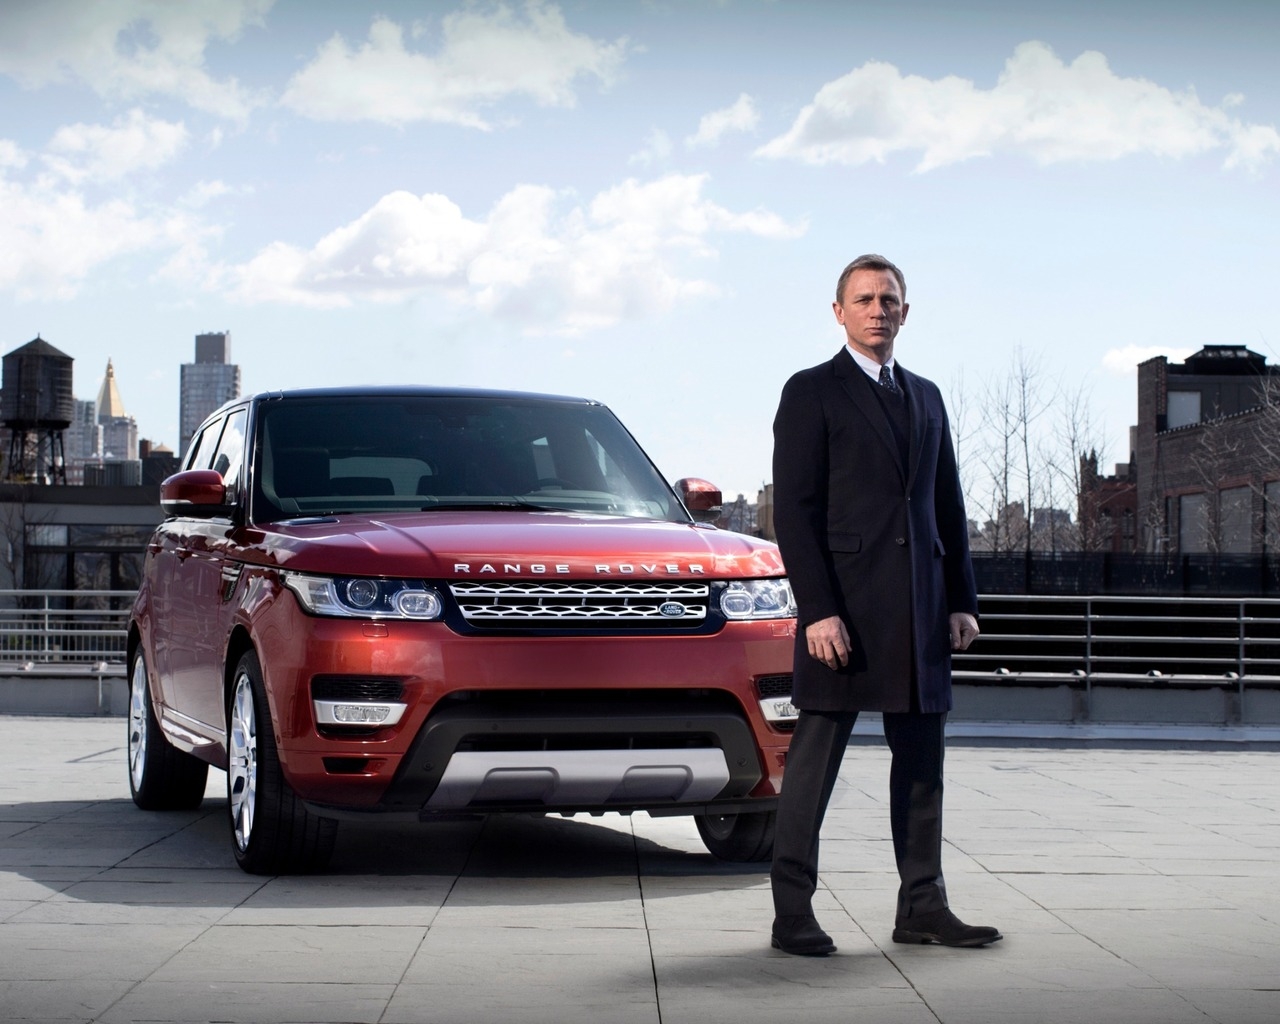 Daniel Craig and Range Rover for 1280 x 1024 resolution